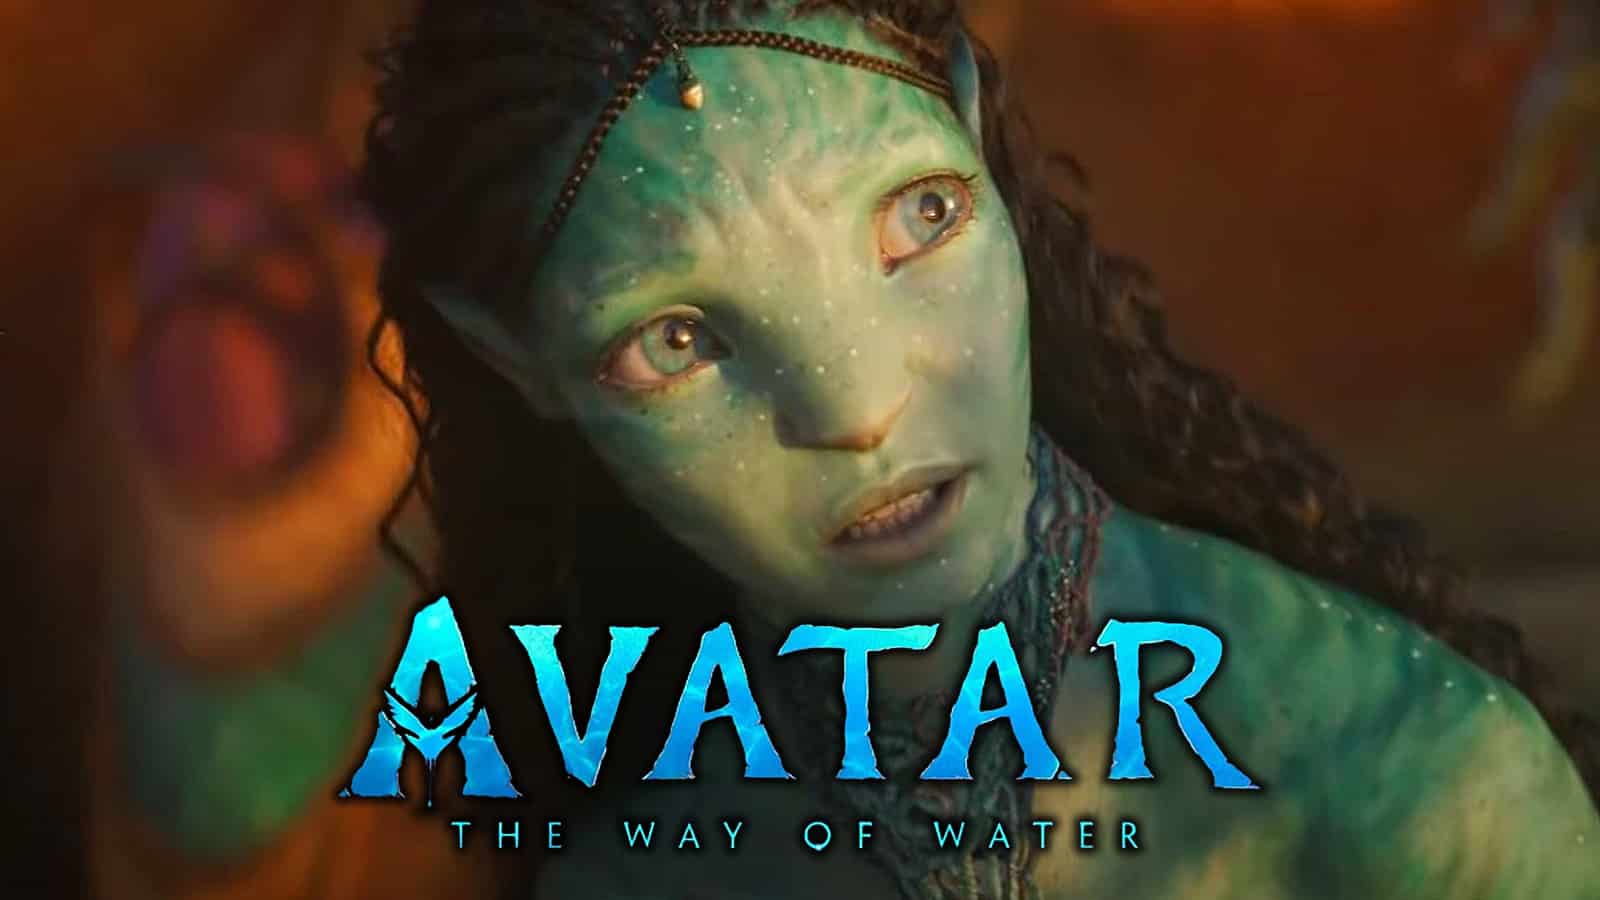 First Avatar: The Way of Water trailer reveals possible plot points